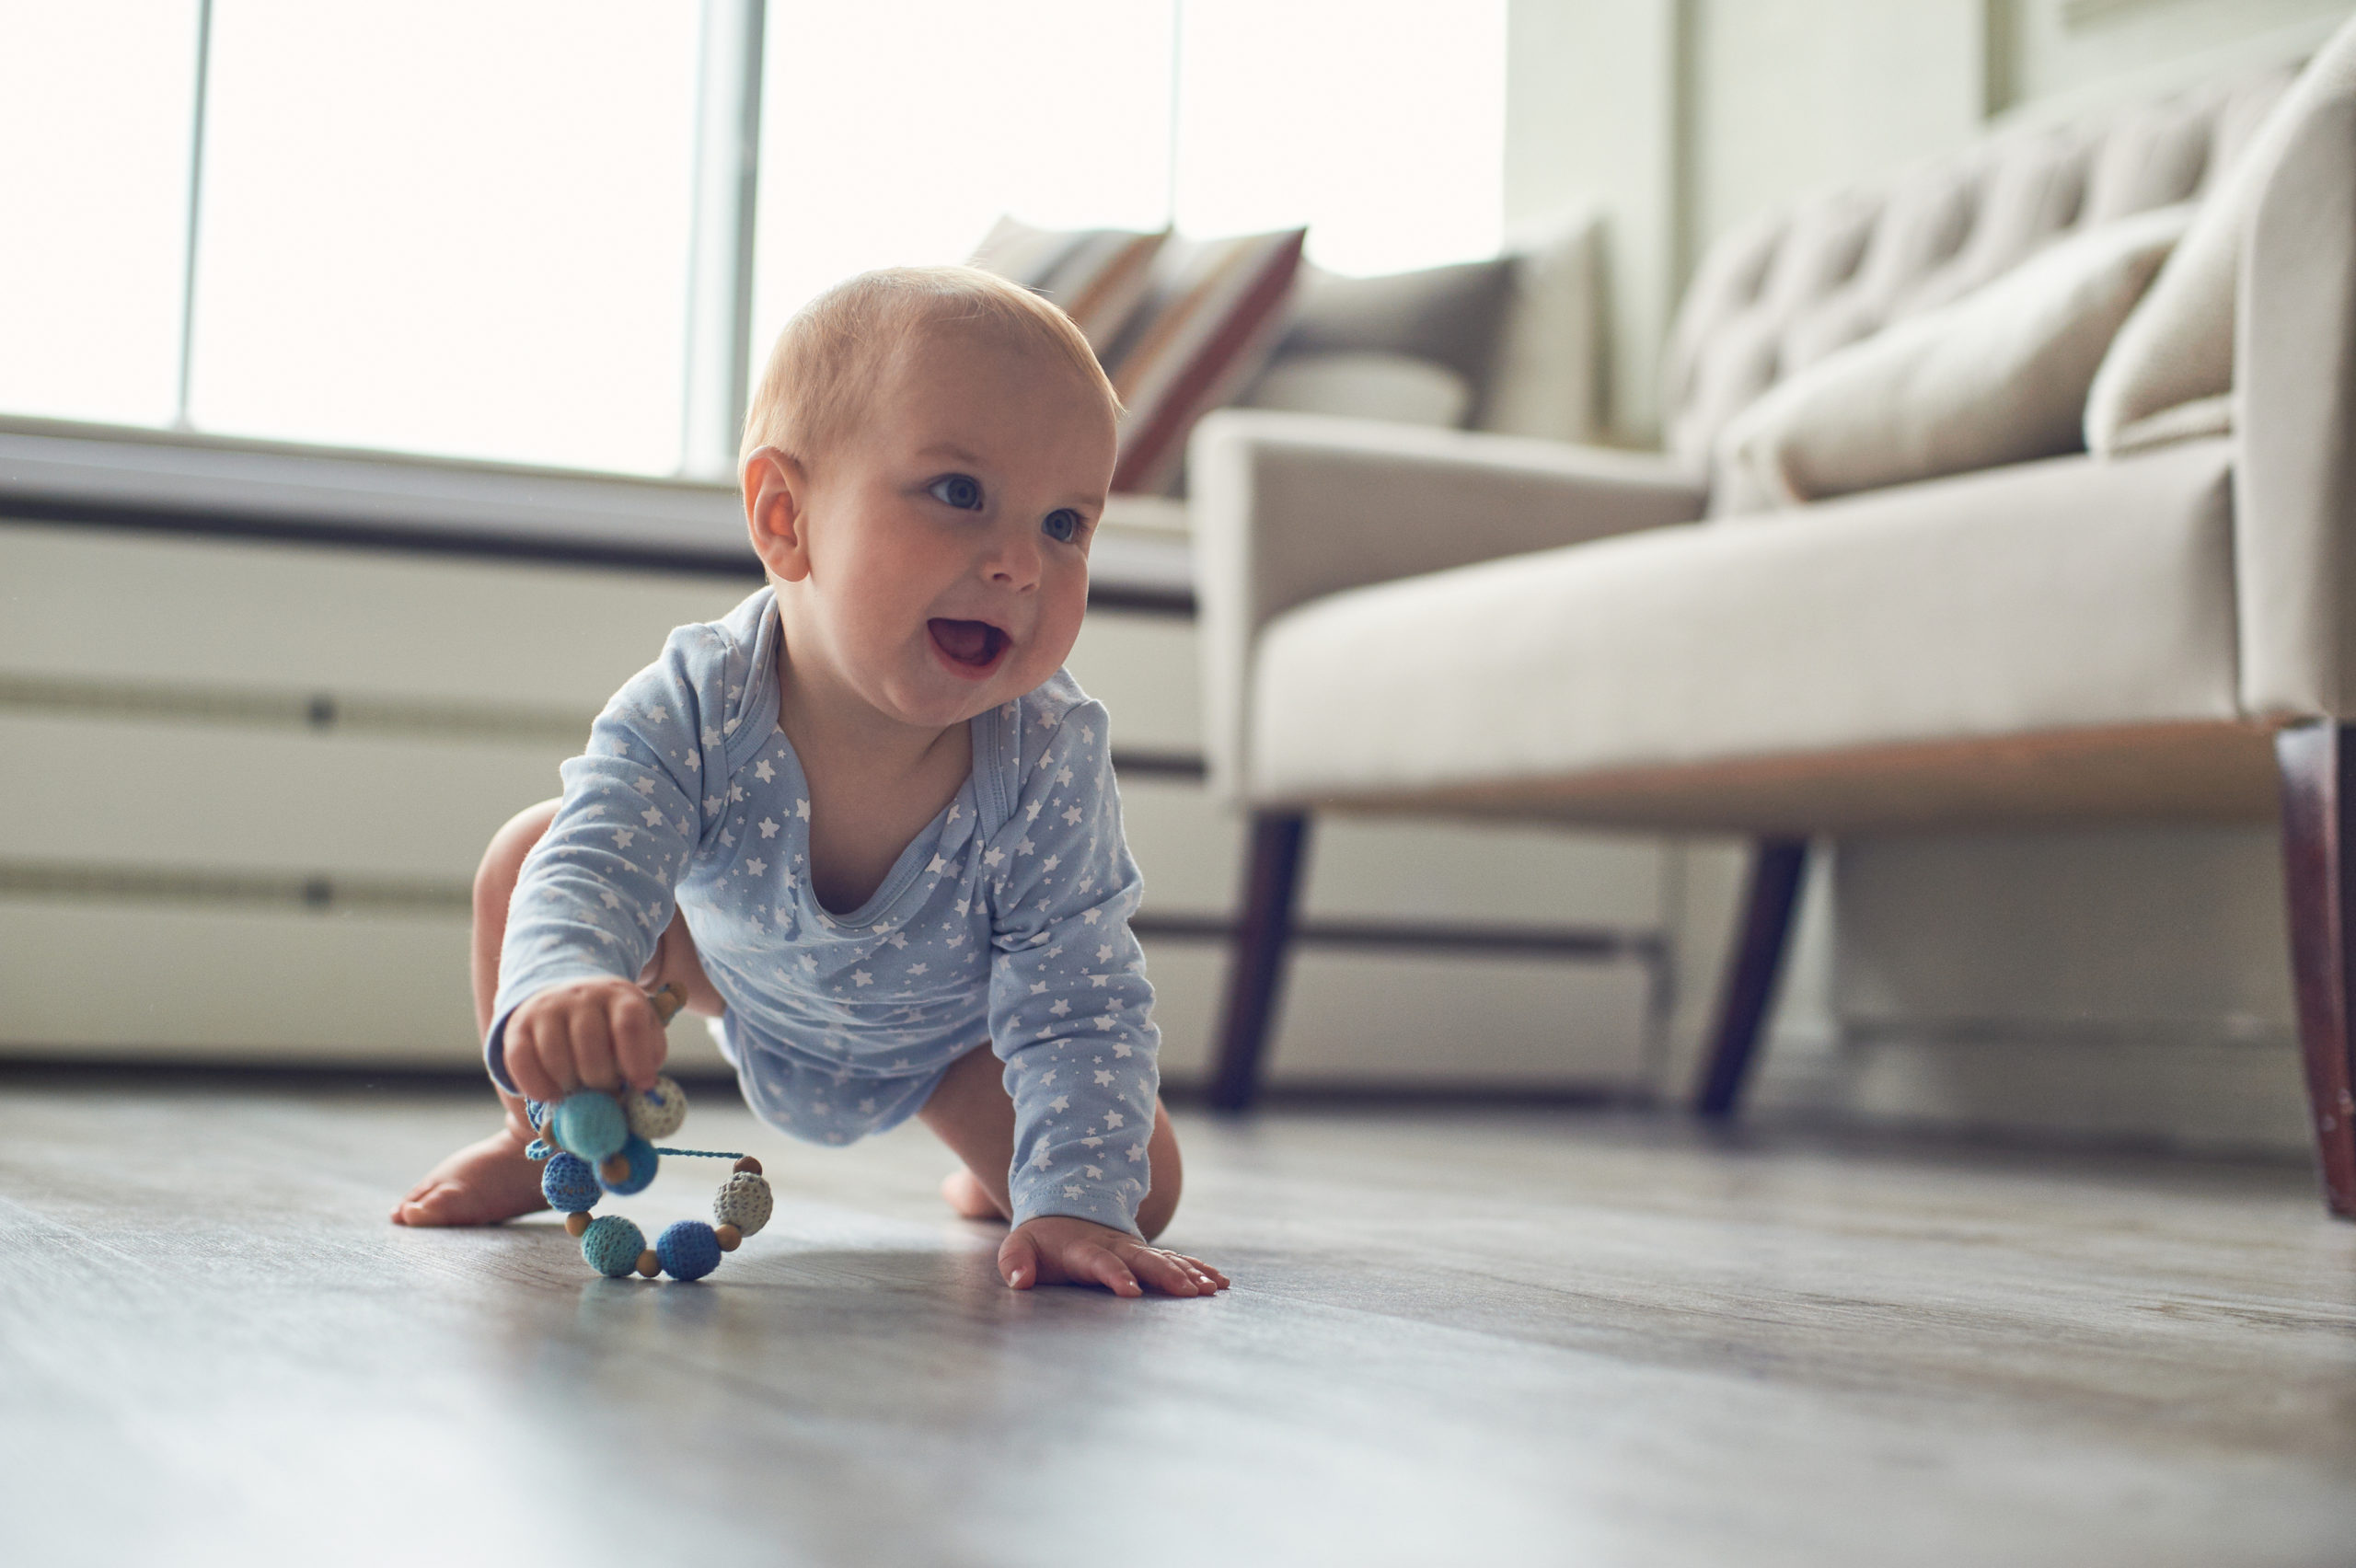 Baby crawling on a newly cleaned floor by ecomaids cleaning services in Hudson.